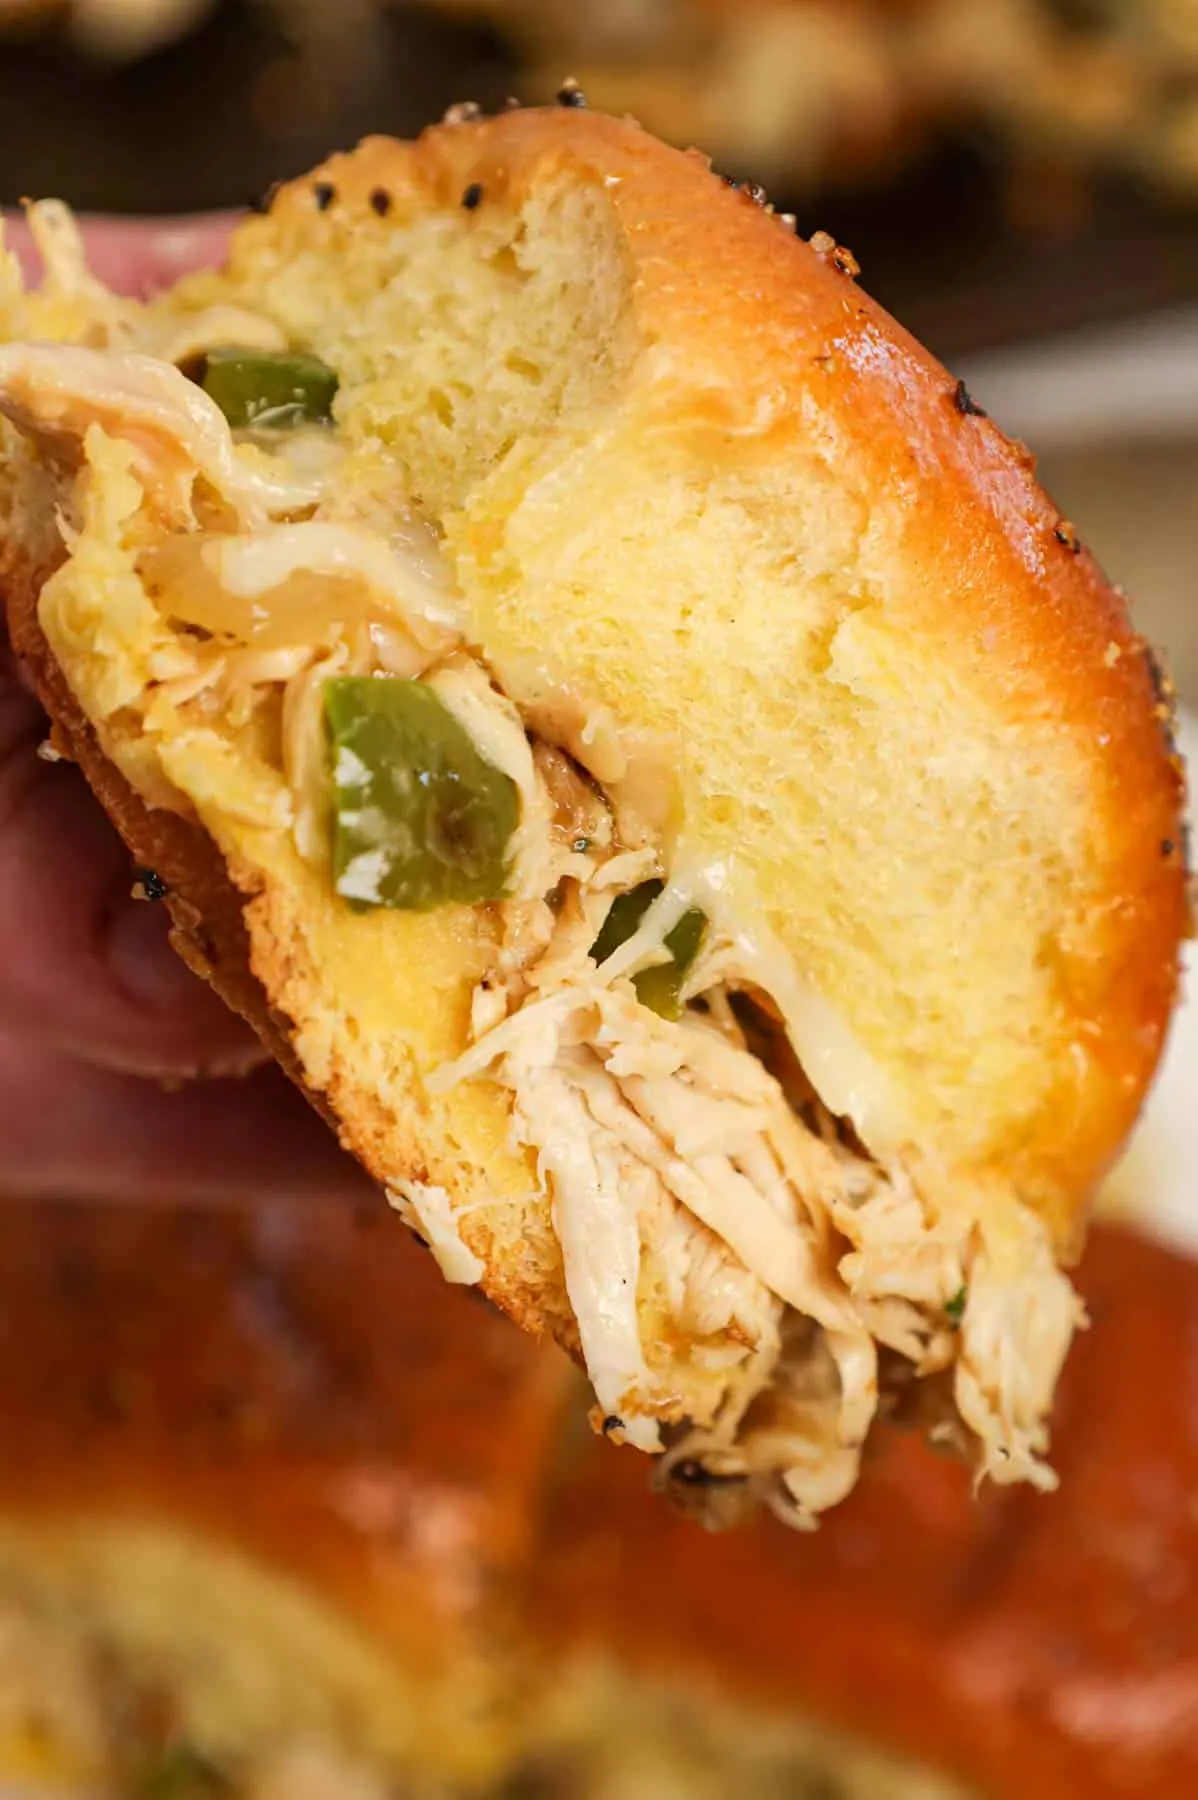 Chicken Philly Sliders are delicious mini sandwiches on brioche dinner rolls loaded with shredded chicken, green bell peppers, onions and Provolone cheese.